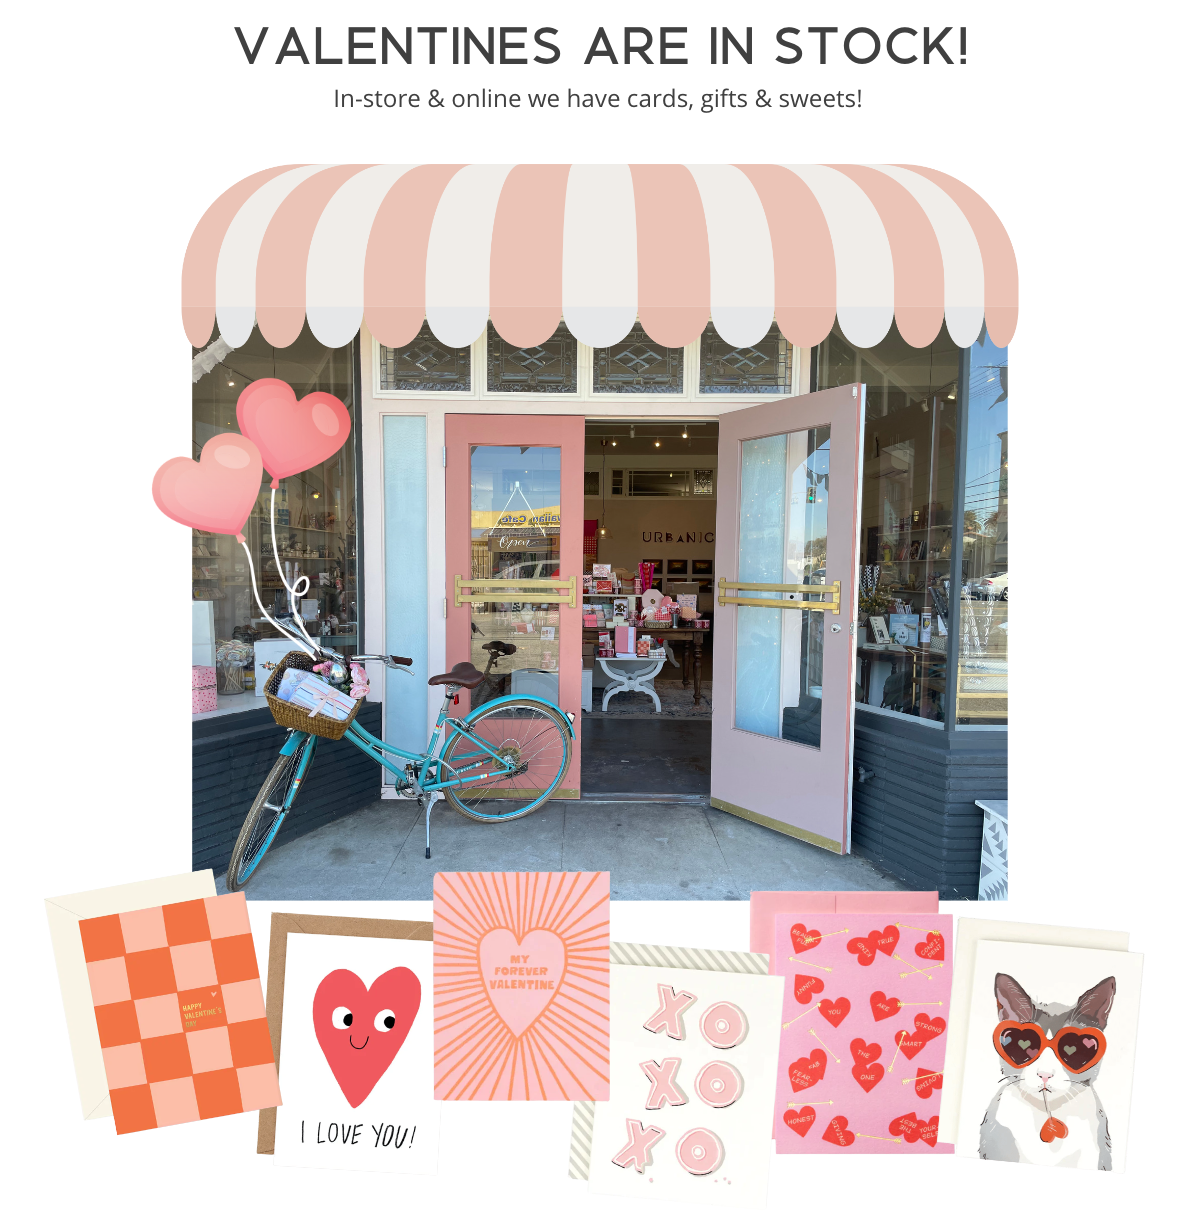 urbanic paper boutique los angeles california stationery gifts february valentines greeting cards in stock in-store shop brick and mortar